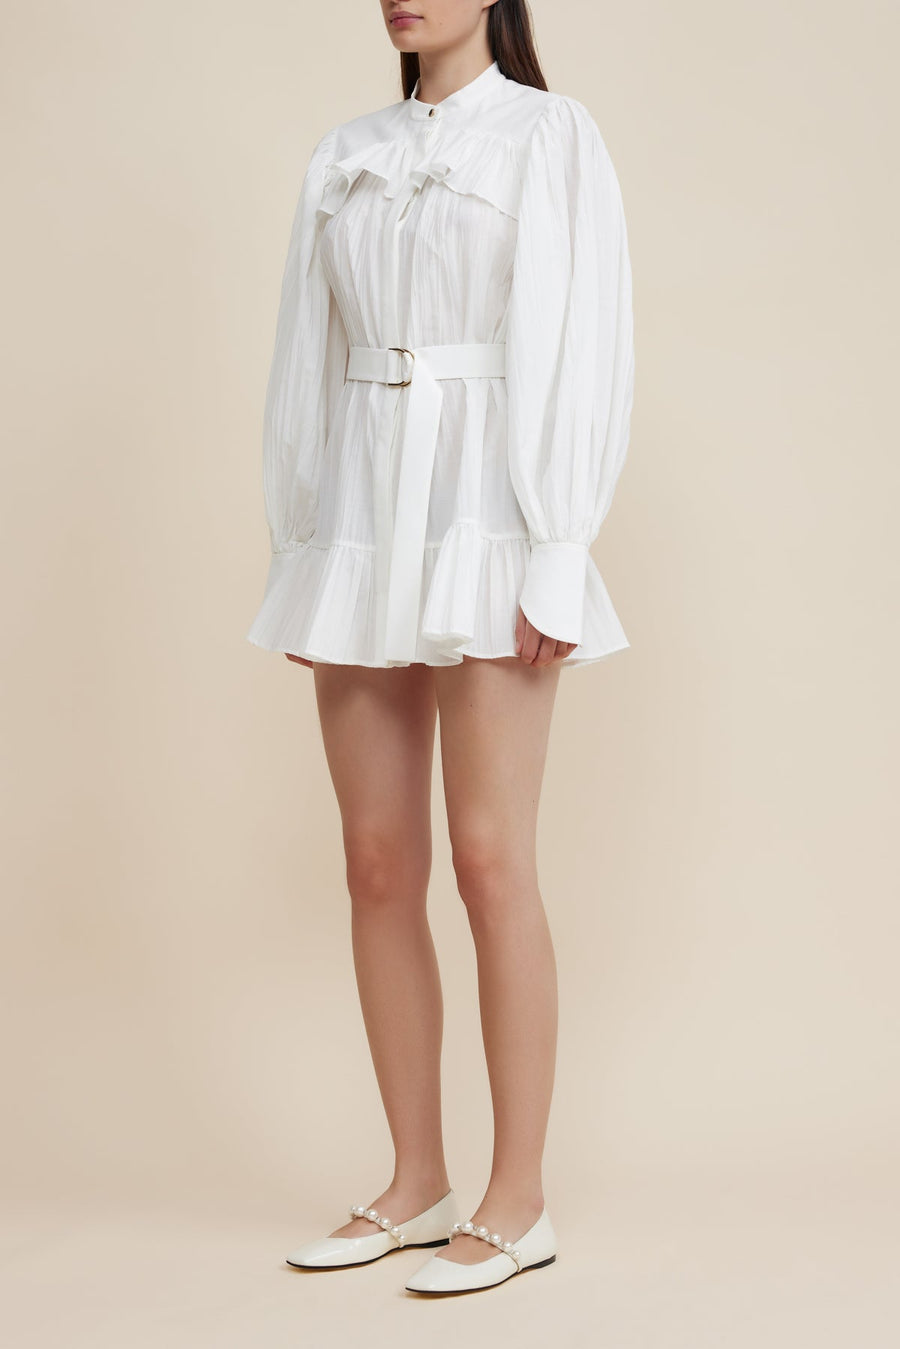 Acler - Harold Dress in Ivory